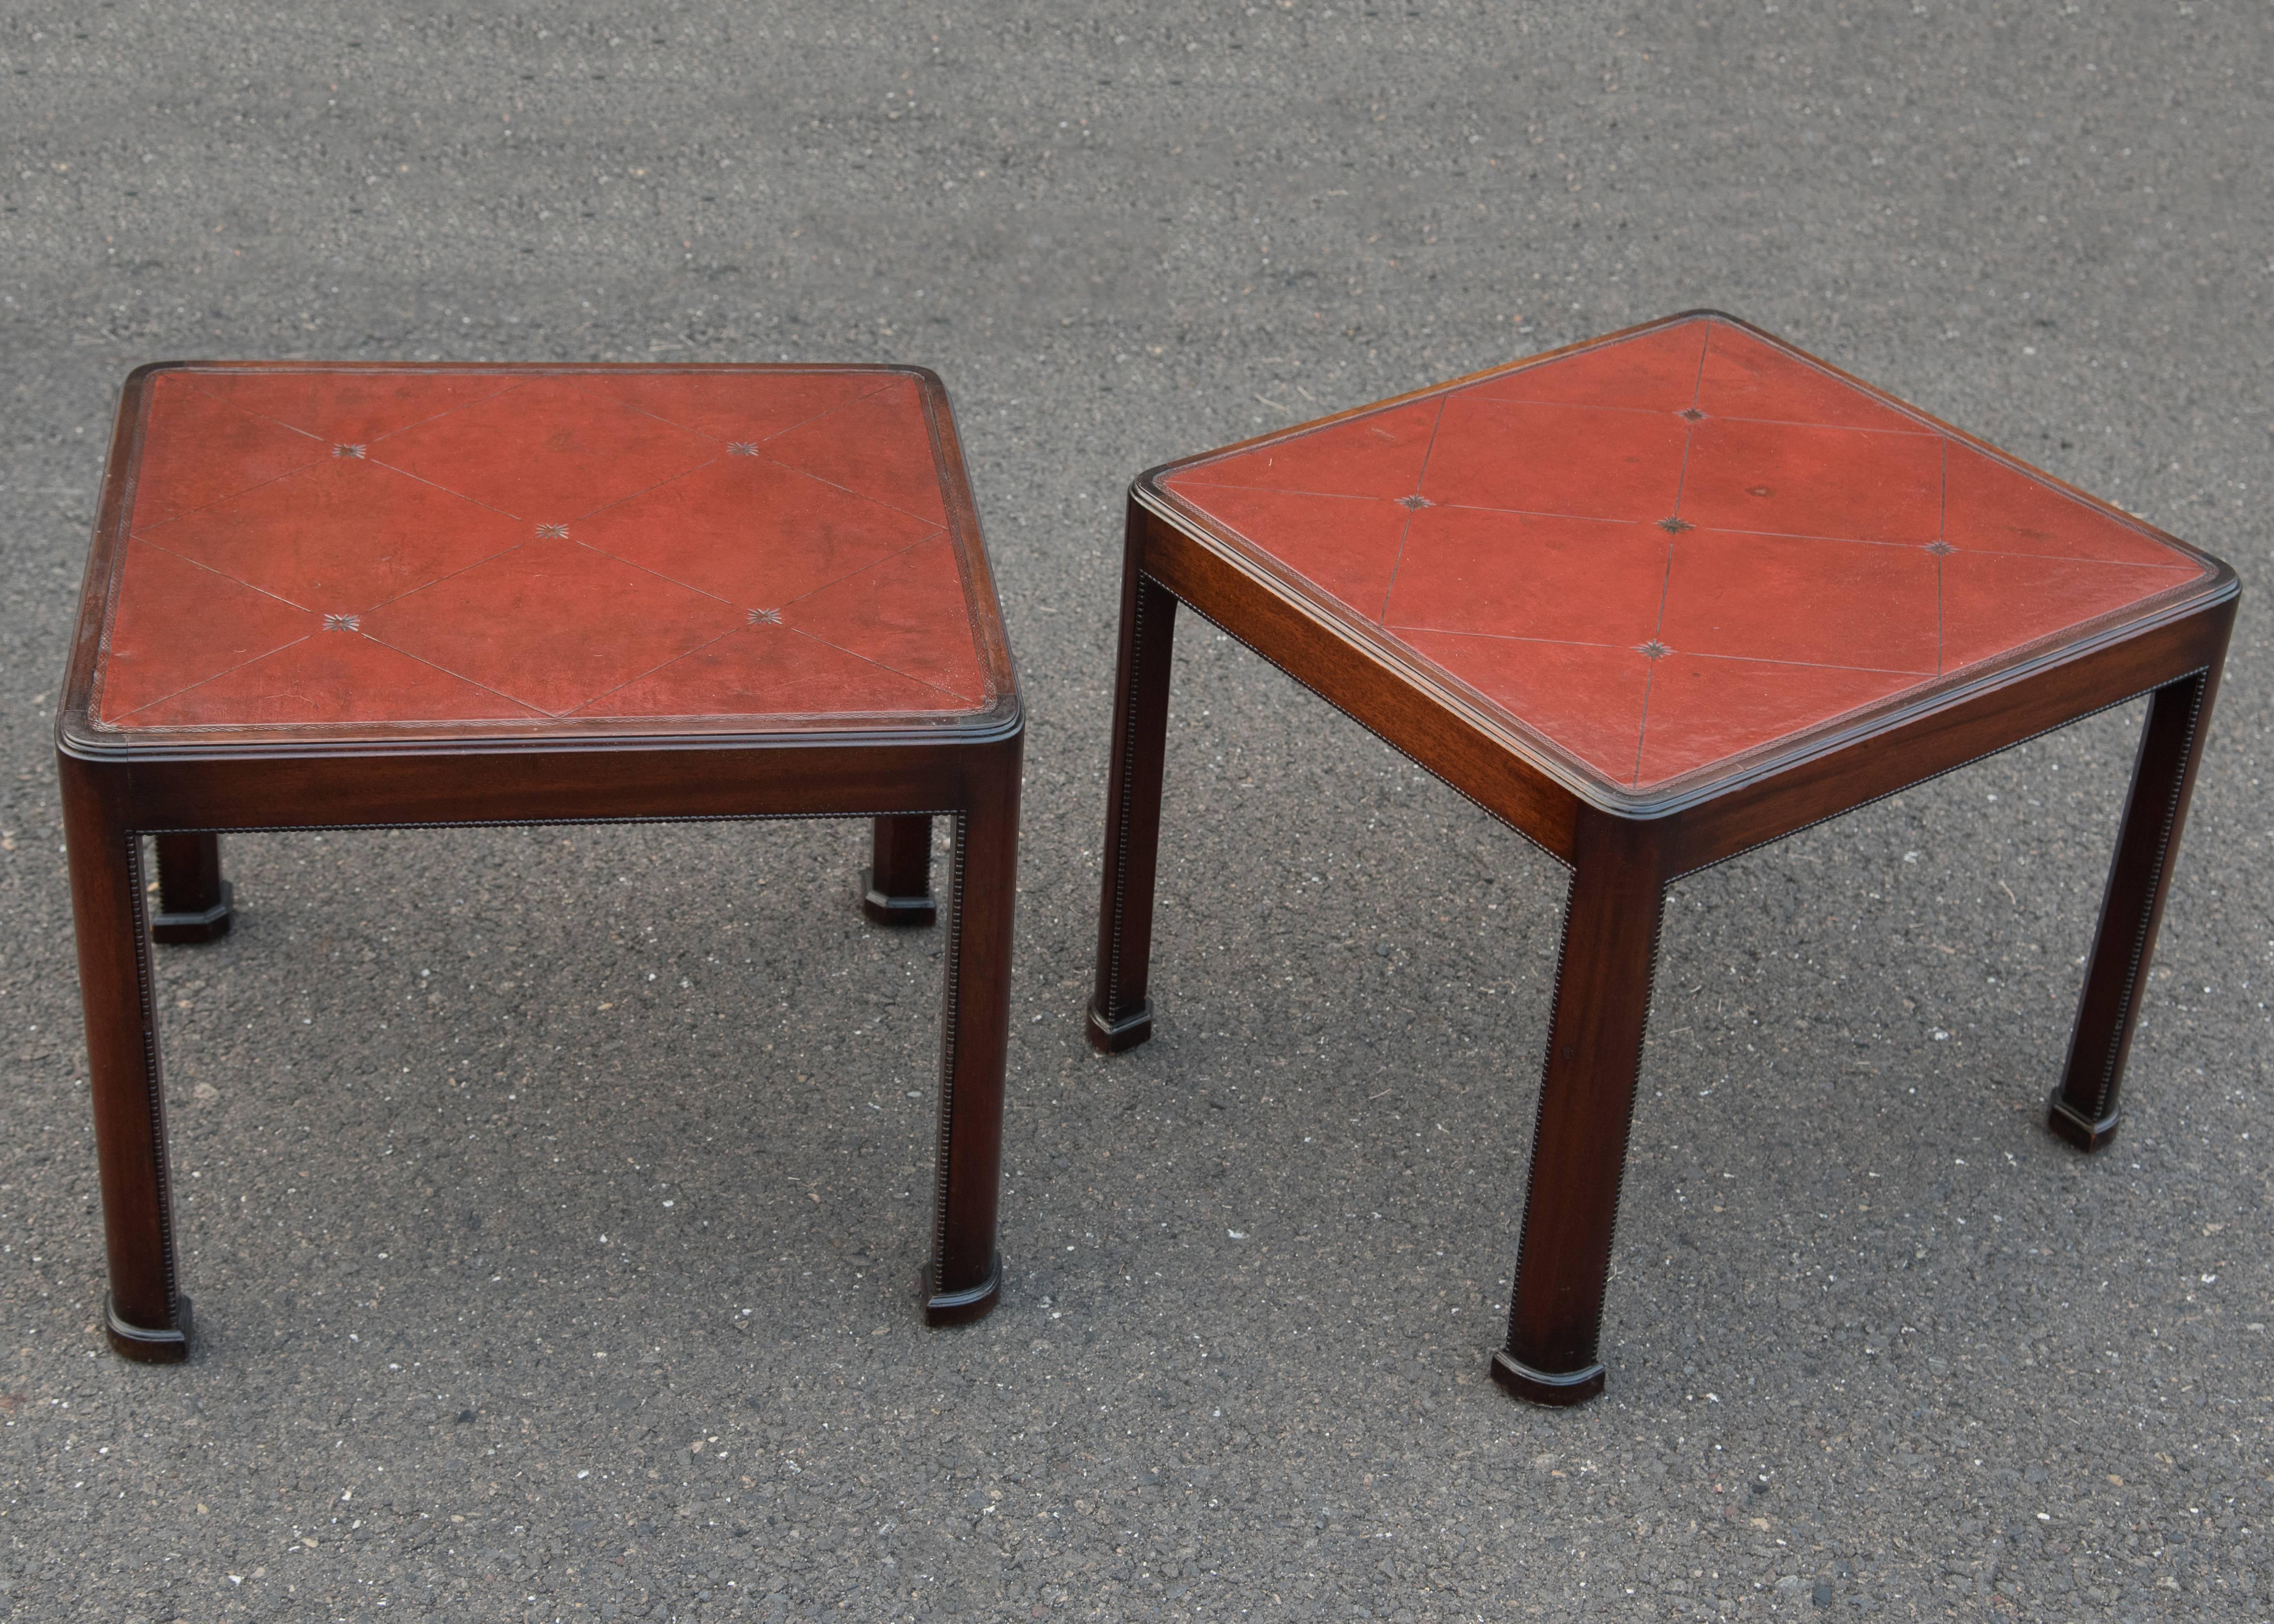 Mahogany Stunning Pair of Tommi Parzinger for Charak Leather Top End Tables